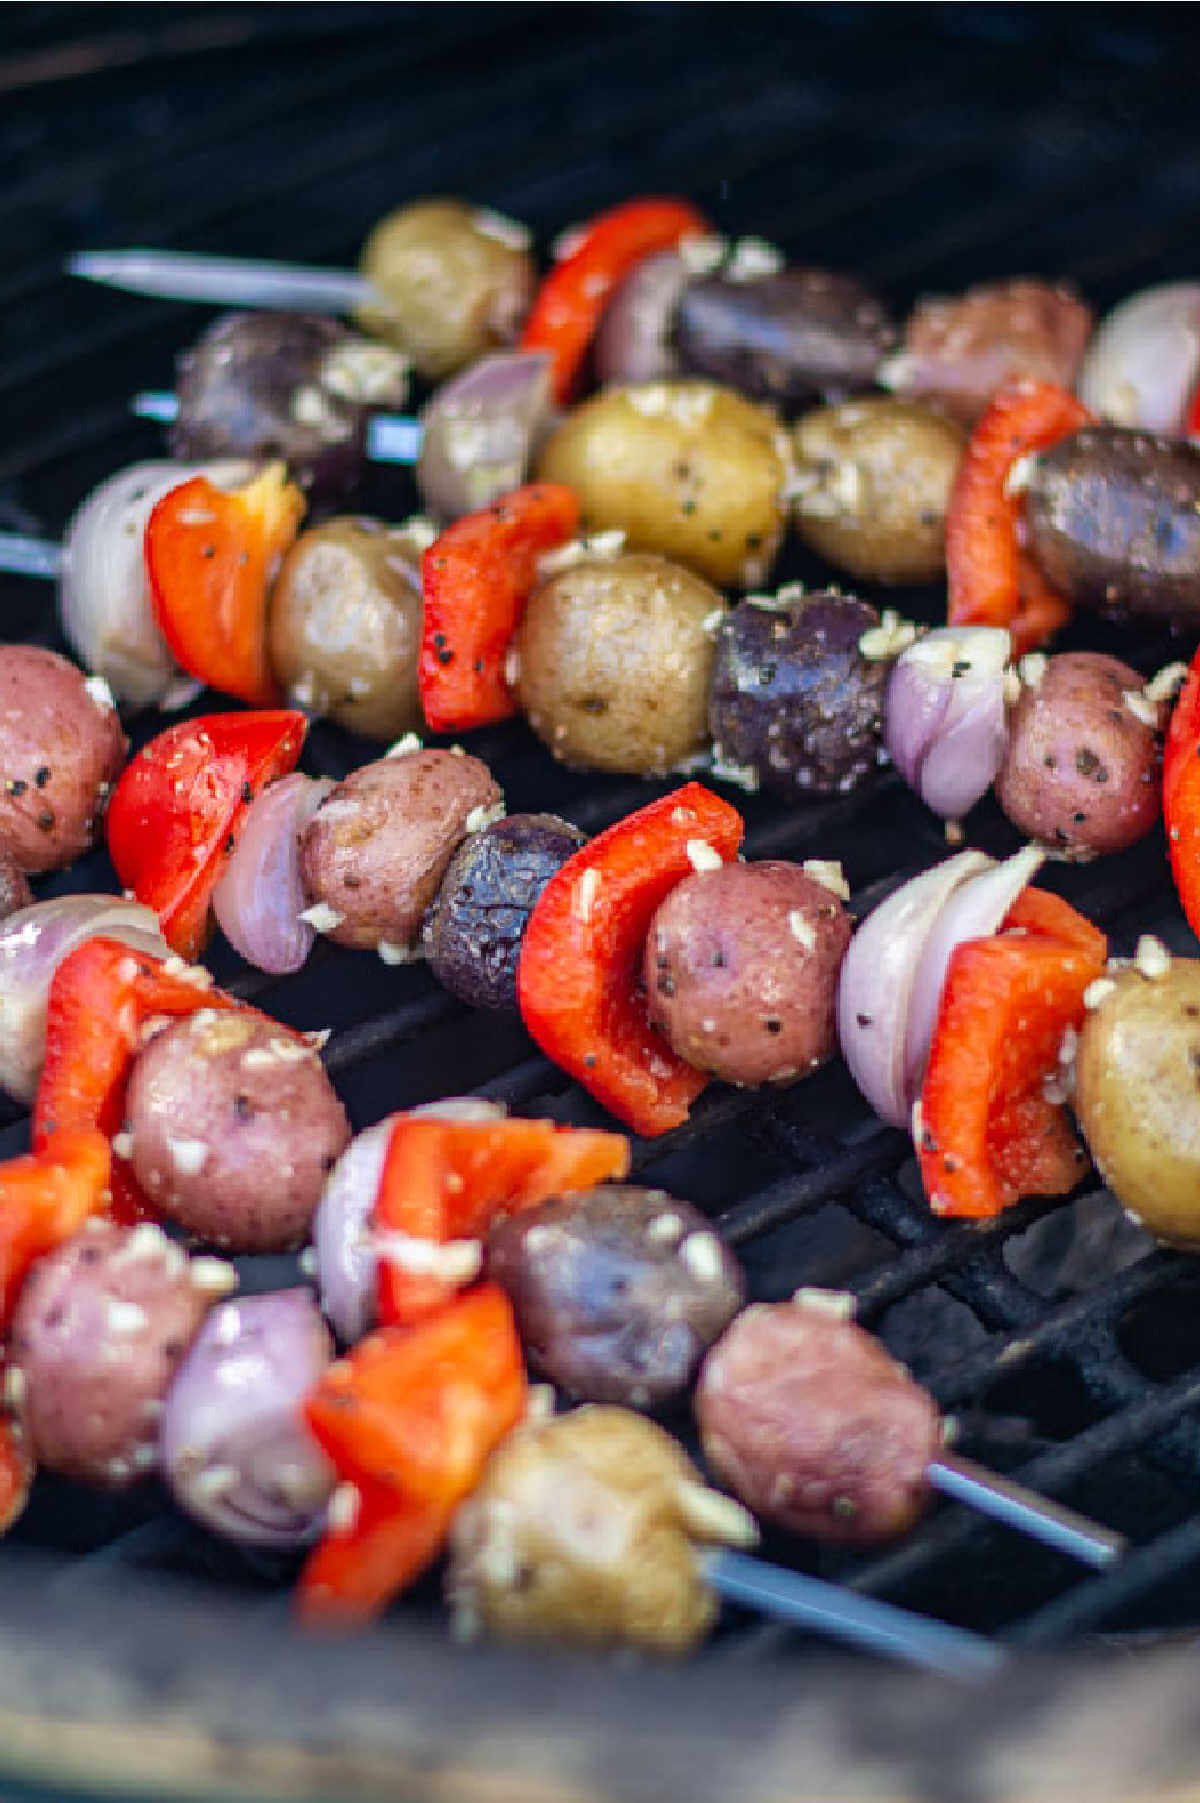 potatoes, shallots and red peppers on kabobs and coated with a garlic mixture on the grill.